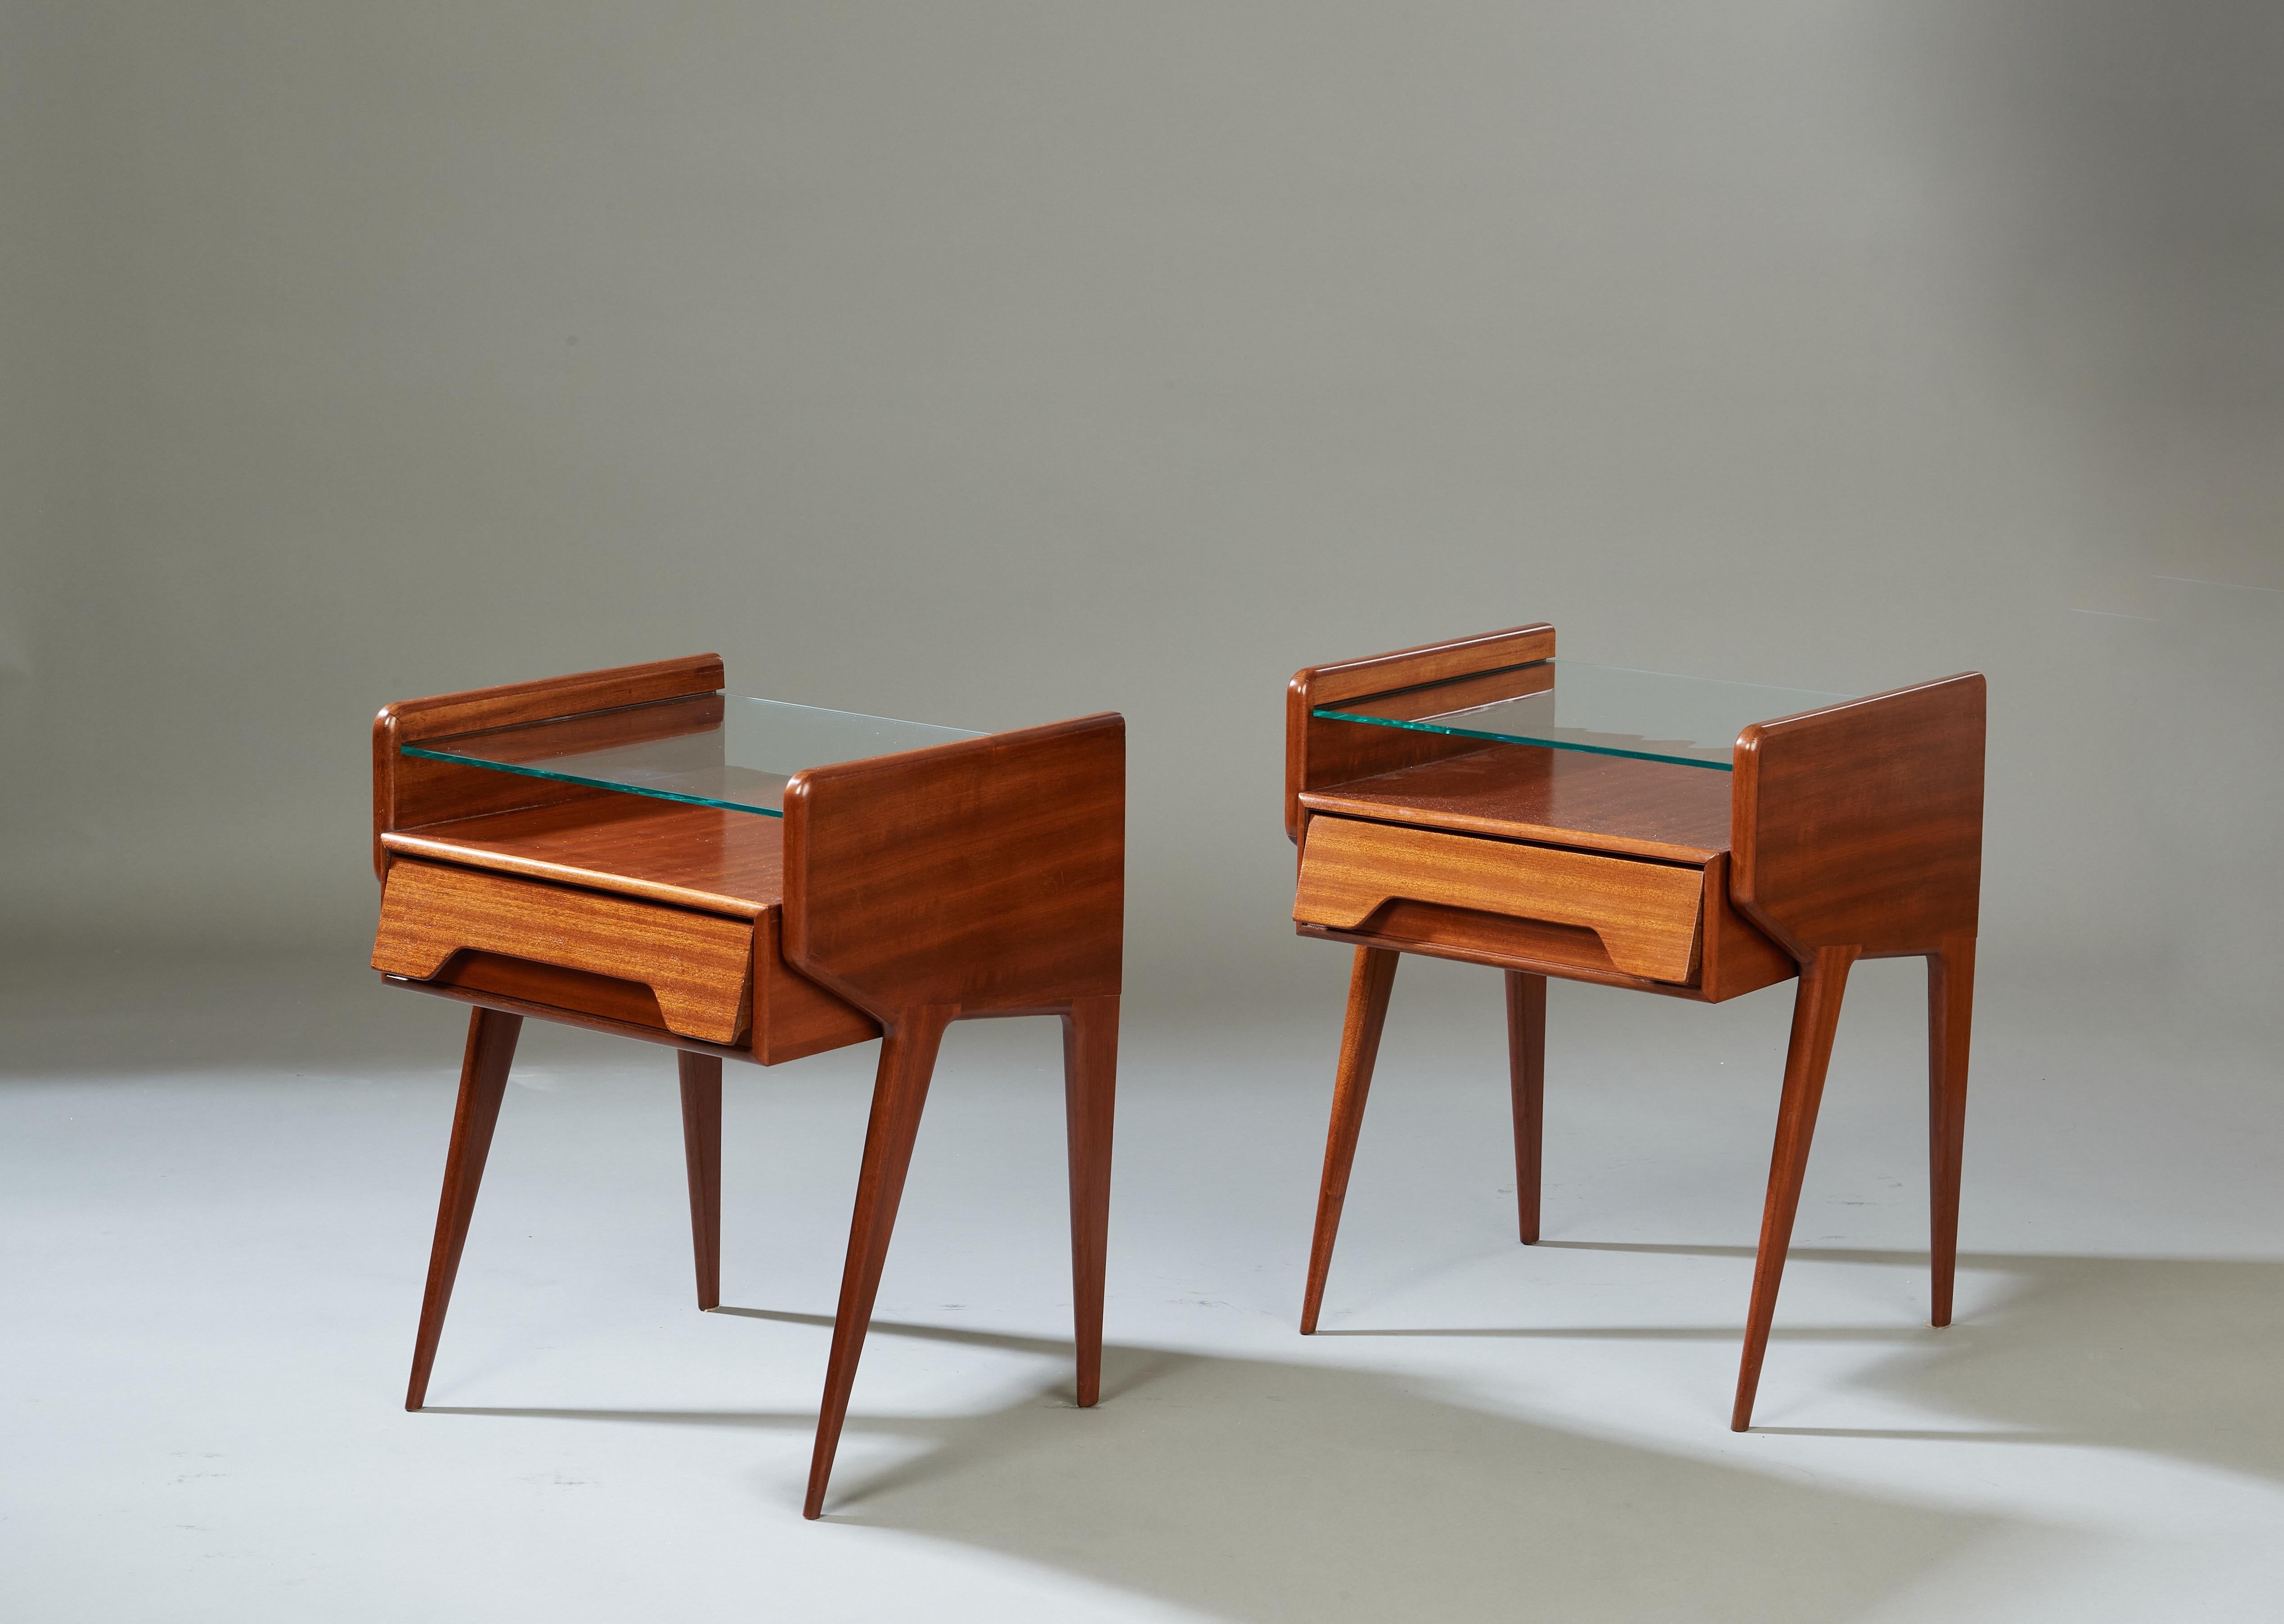 Italy, 1950's 

A dynamic pair of modernist bedside tables in the manner of Ico Parisi, in polished mahogany with a vibrant tiger's eye grain. A fluid, winged body with rounded edges supports a floating glass shelf and constructivist drawer with an